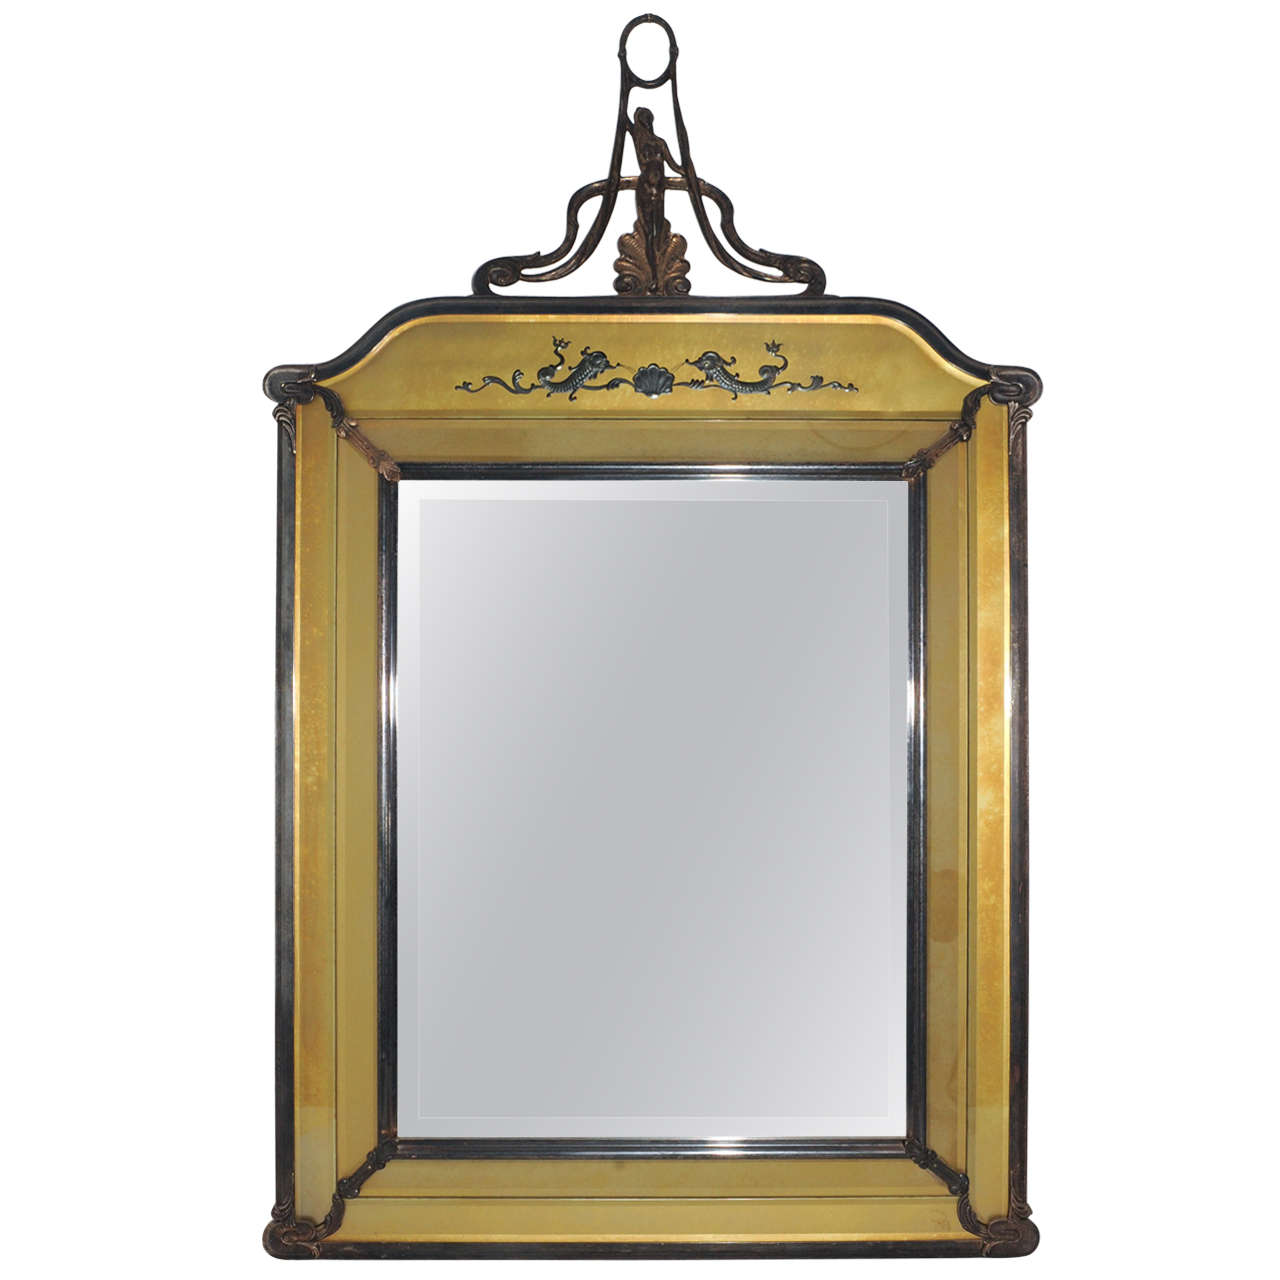 A silverplated double framed brass mirror in Art Nouveau style